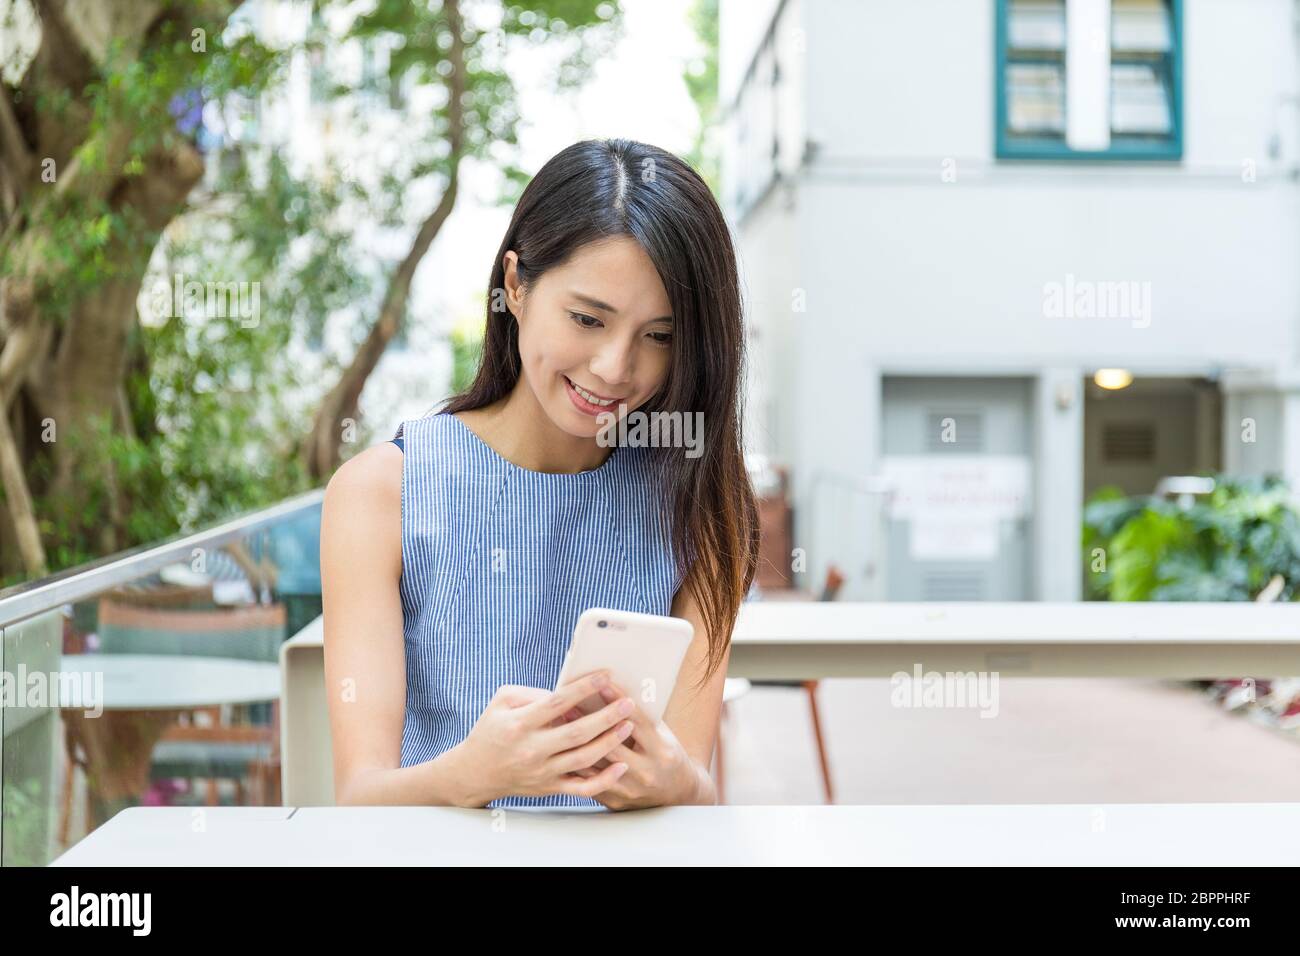 Woman using cellphone in outdoor cafe Stock Photo